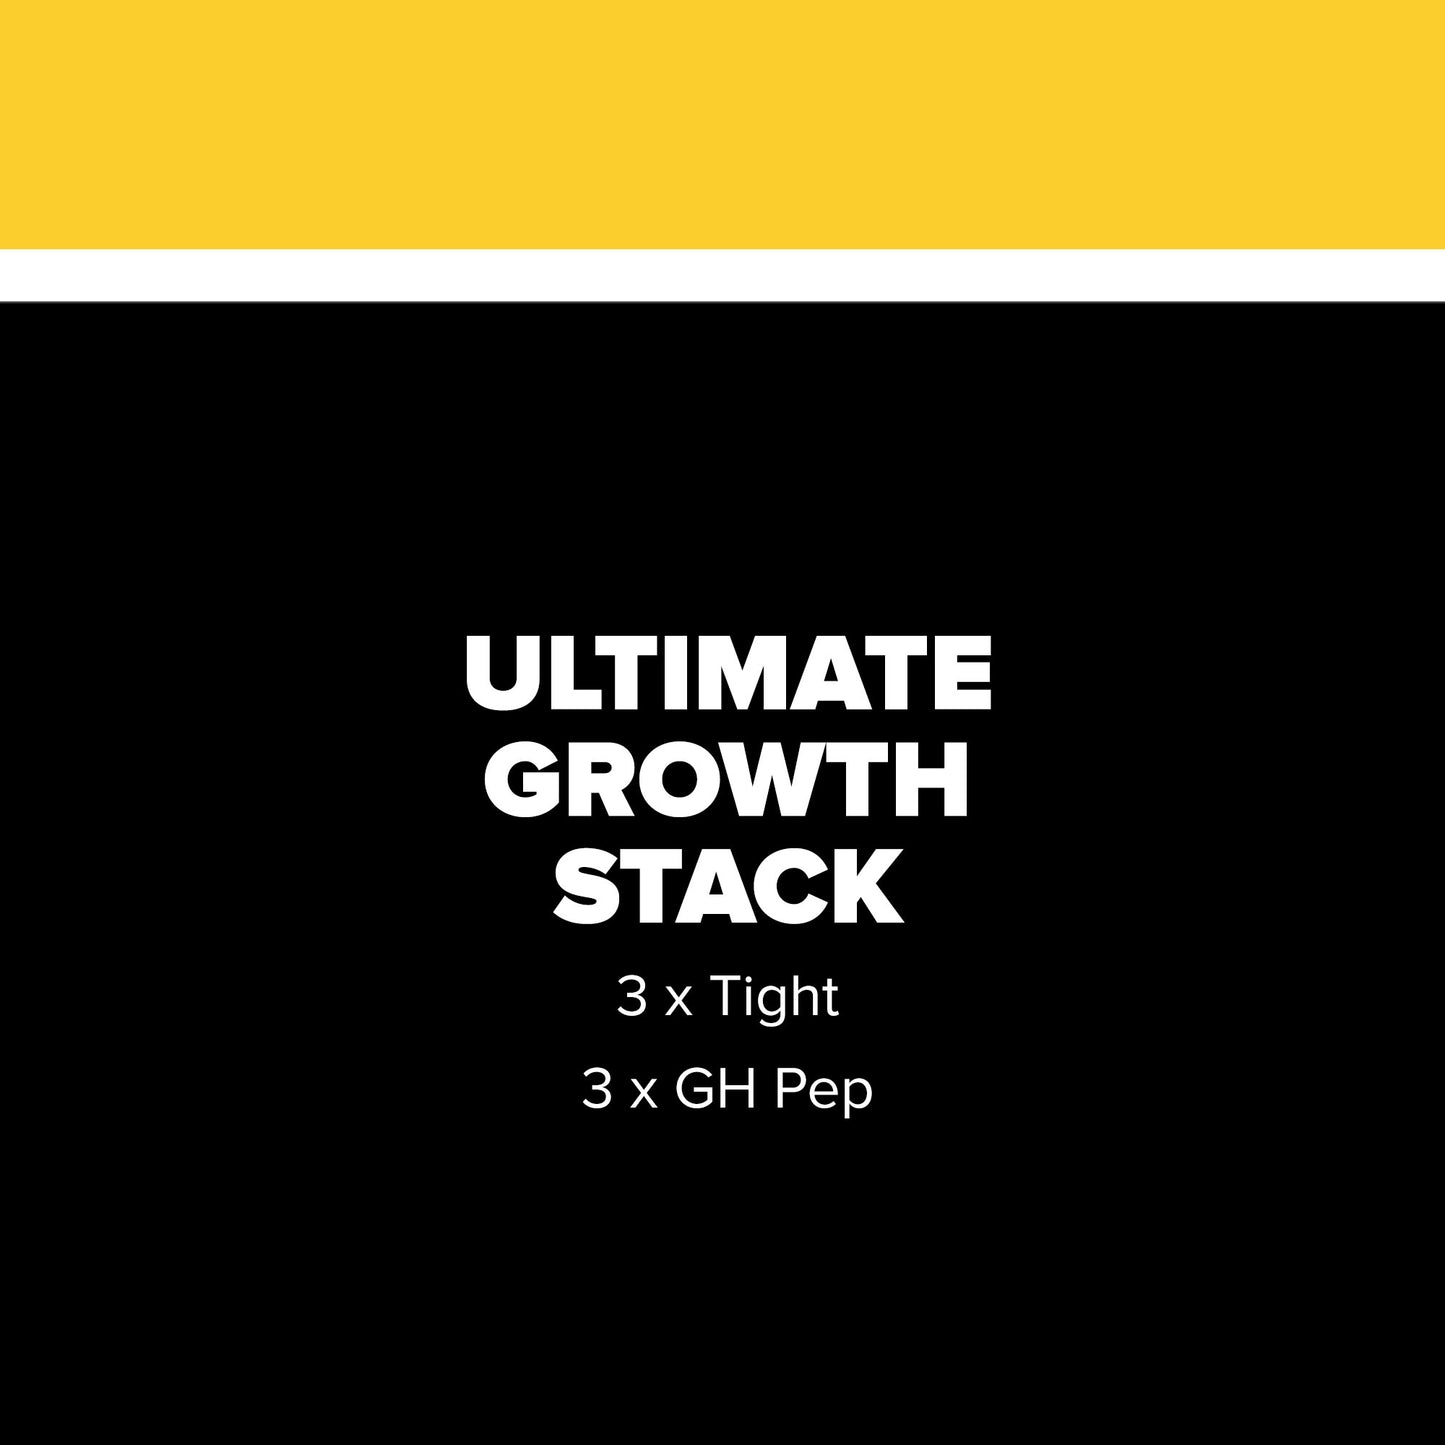 ES - ULTIMATE GROWTH STACK